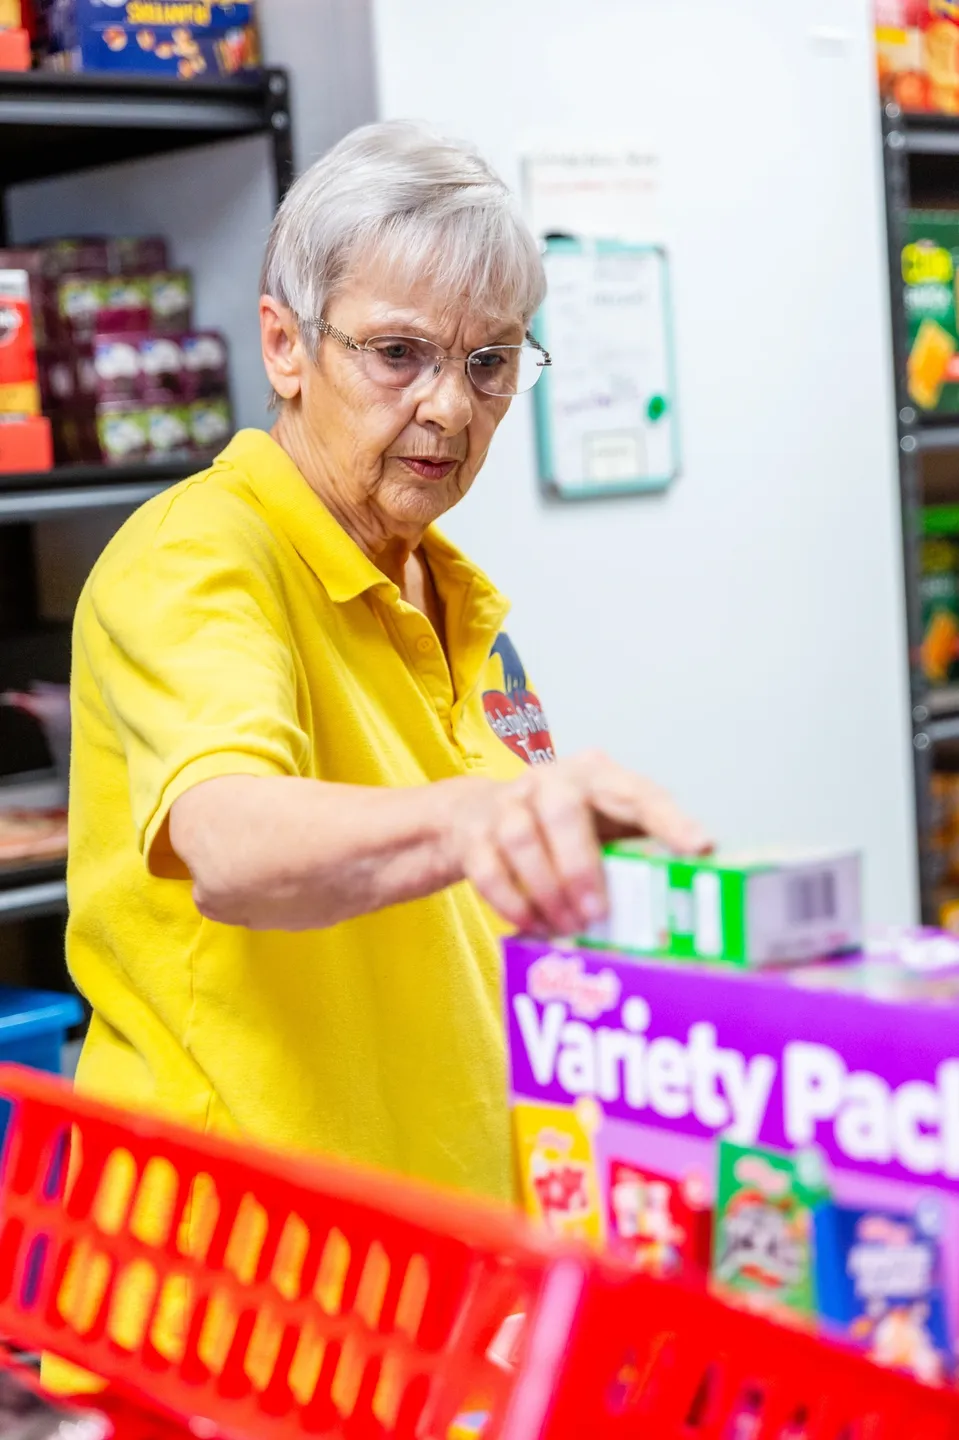 A woman in yellow shirt putting boxes of food on top.